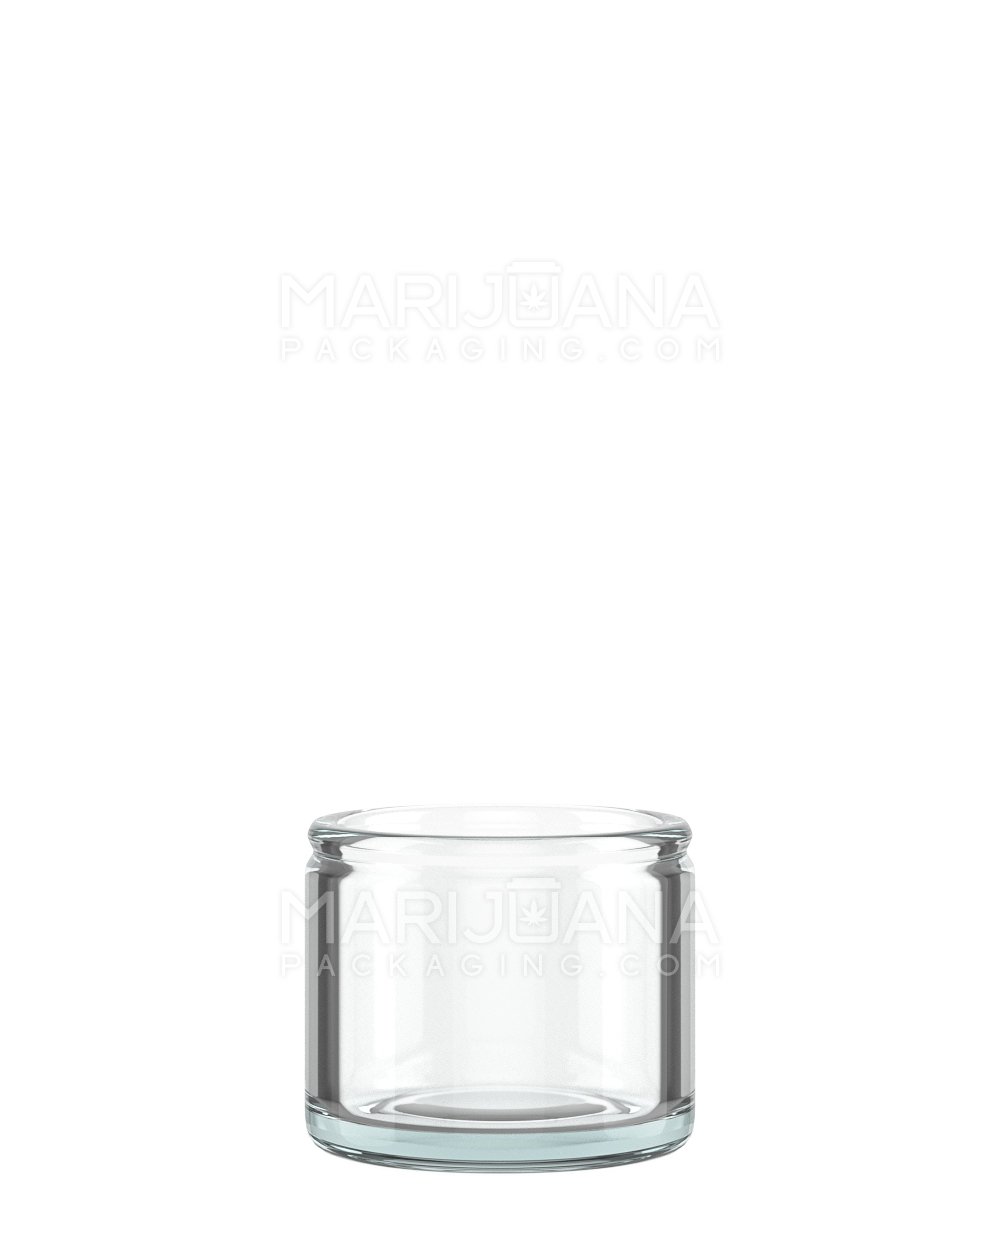 6ML GLASS Containers with CLEAR lid